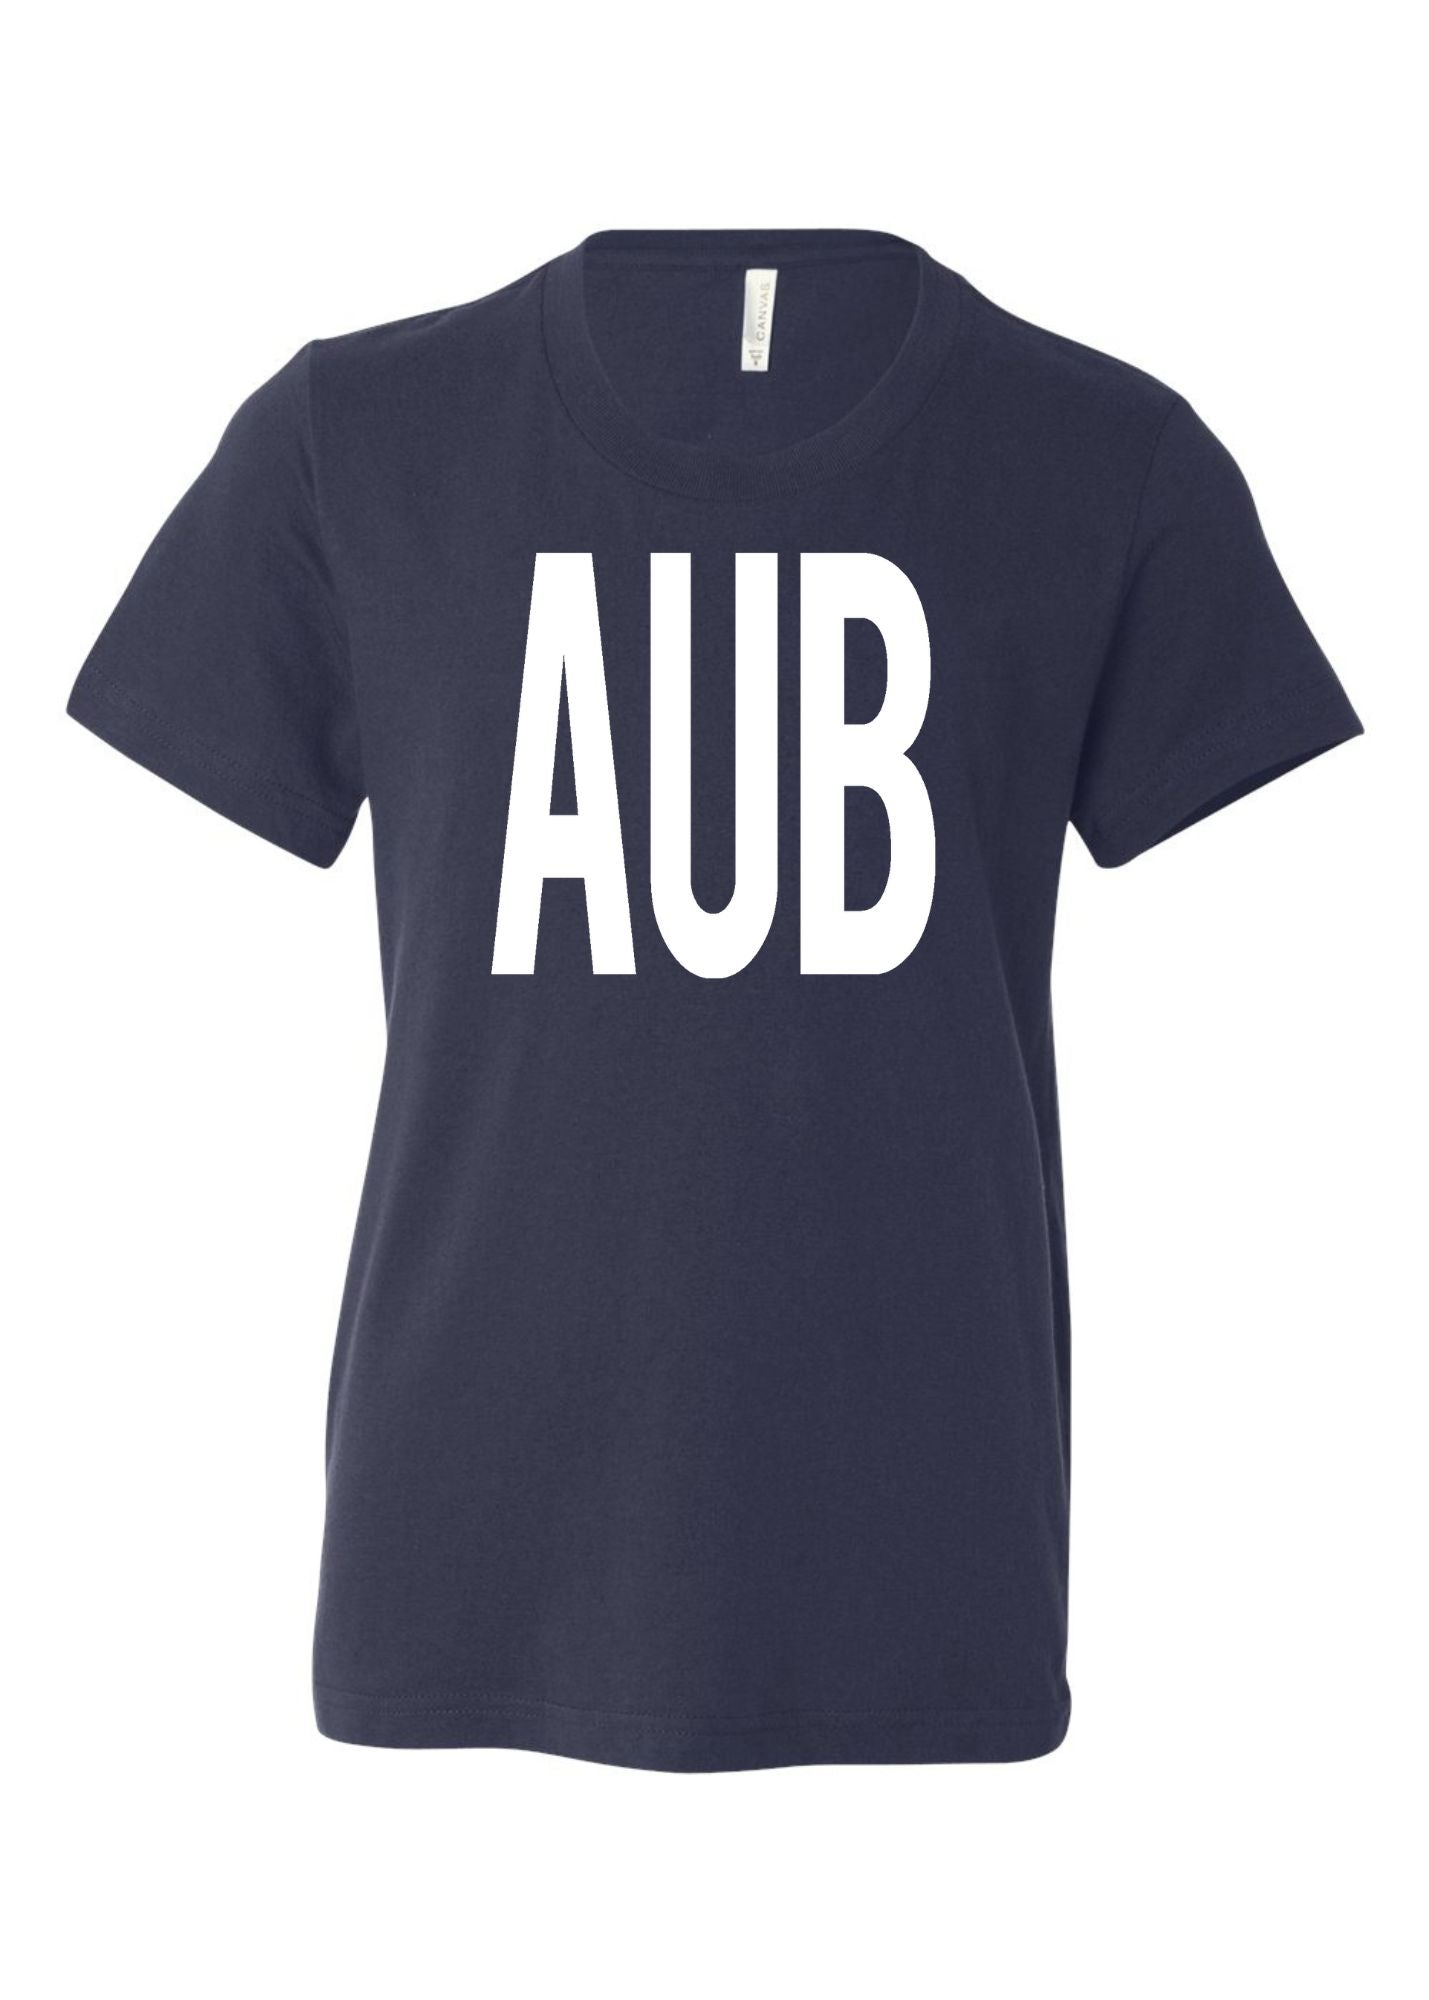 AUB | Tee | Kids-Sister Shirts-Sister Shirts, Cute & Custom Tees for Mama & Littles in Trussville, Alabama.